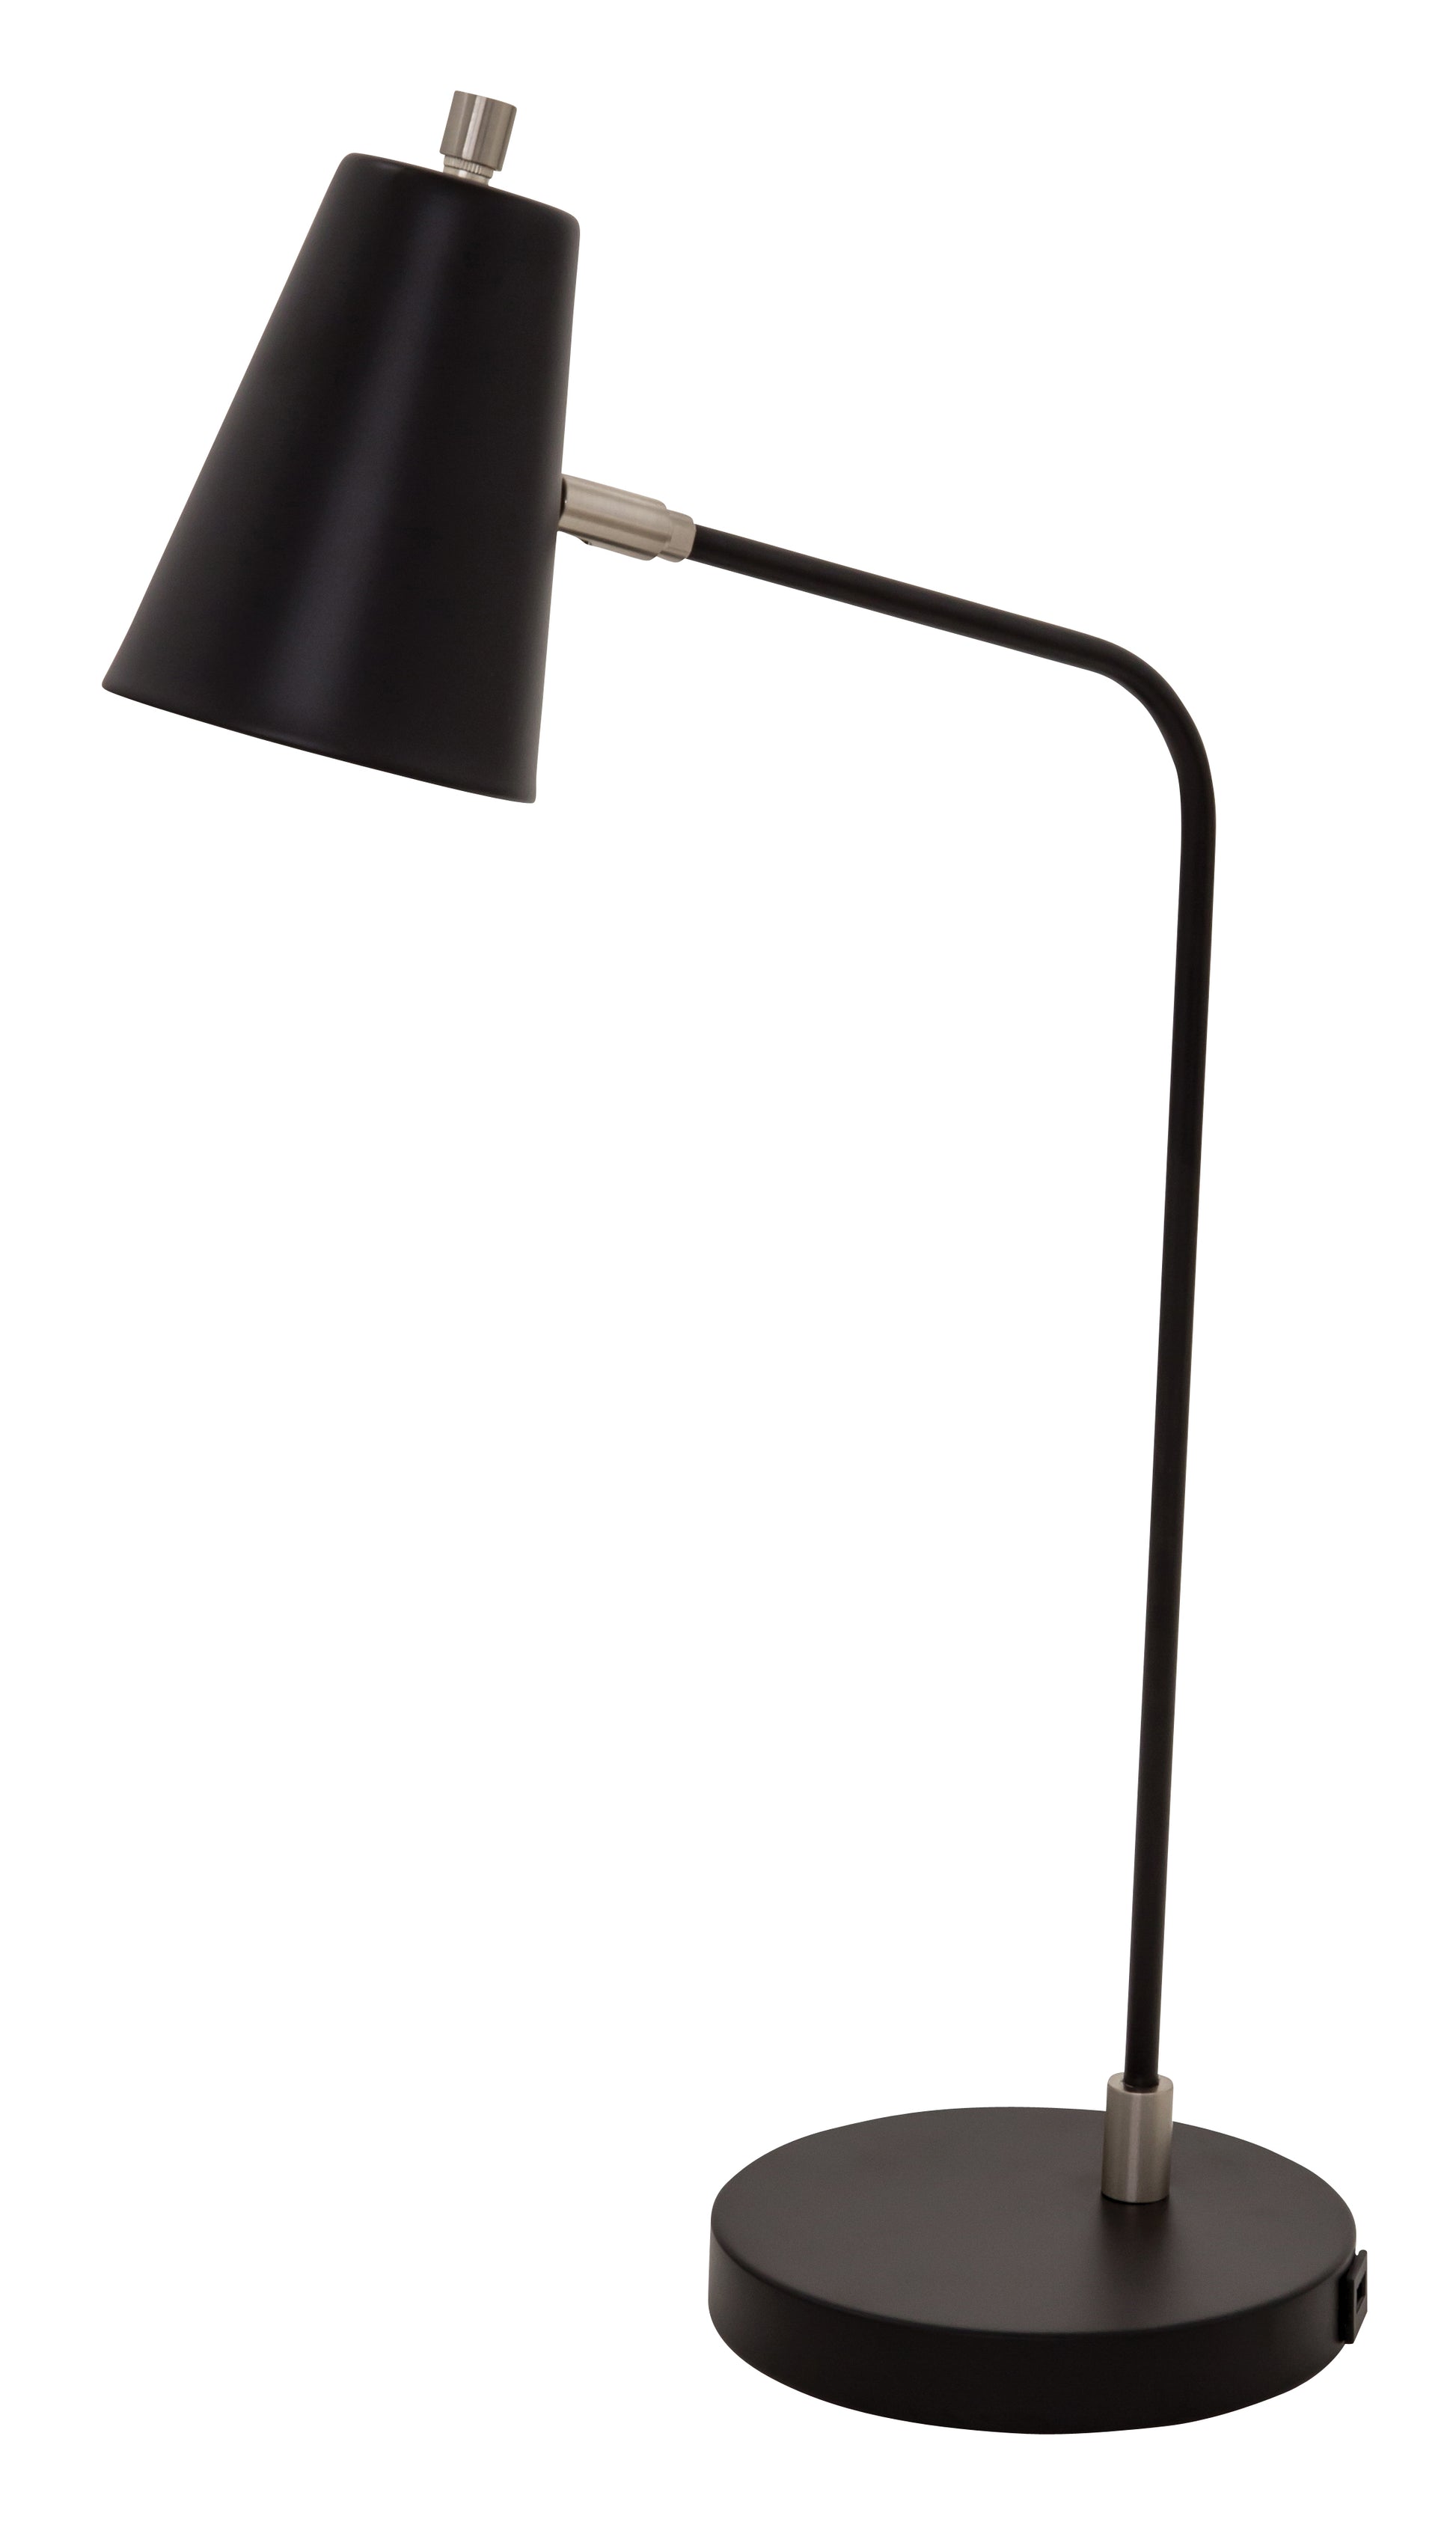 House of Troy Kirby LED task lamp in black with satin nickel accents and USB port K150-BLK